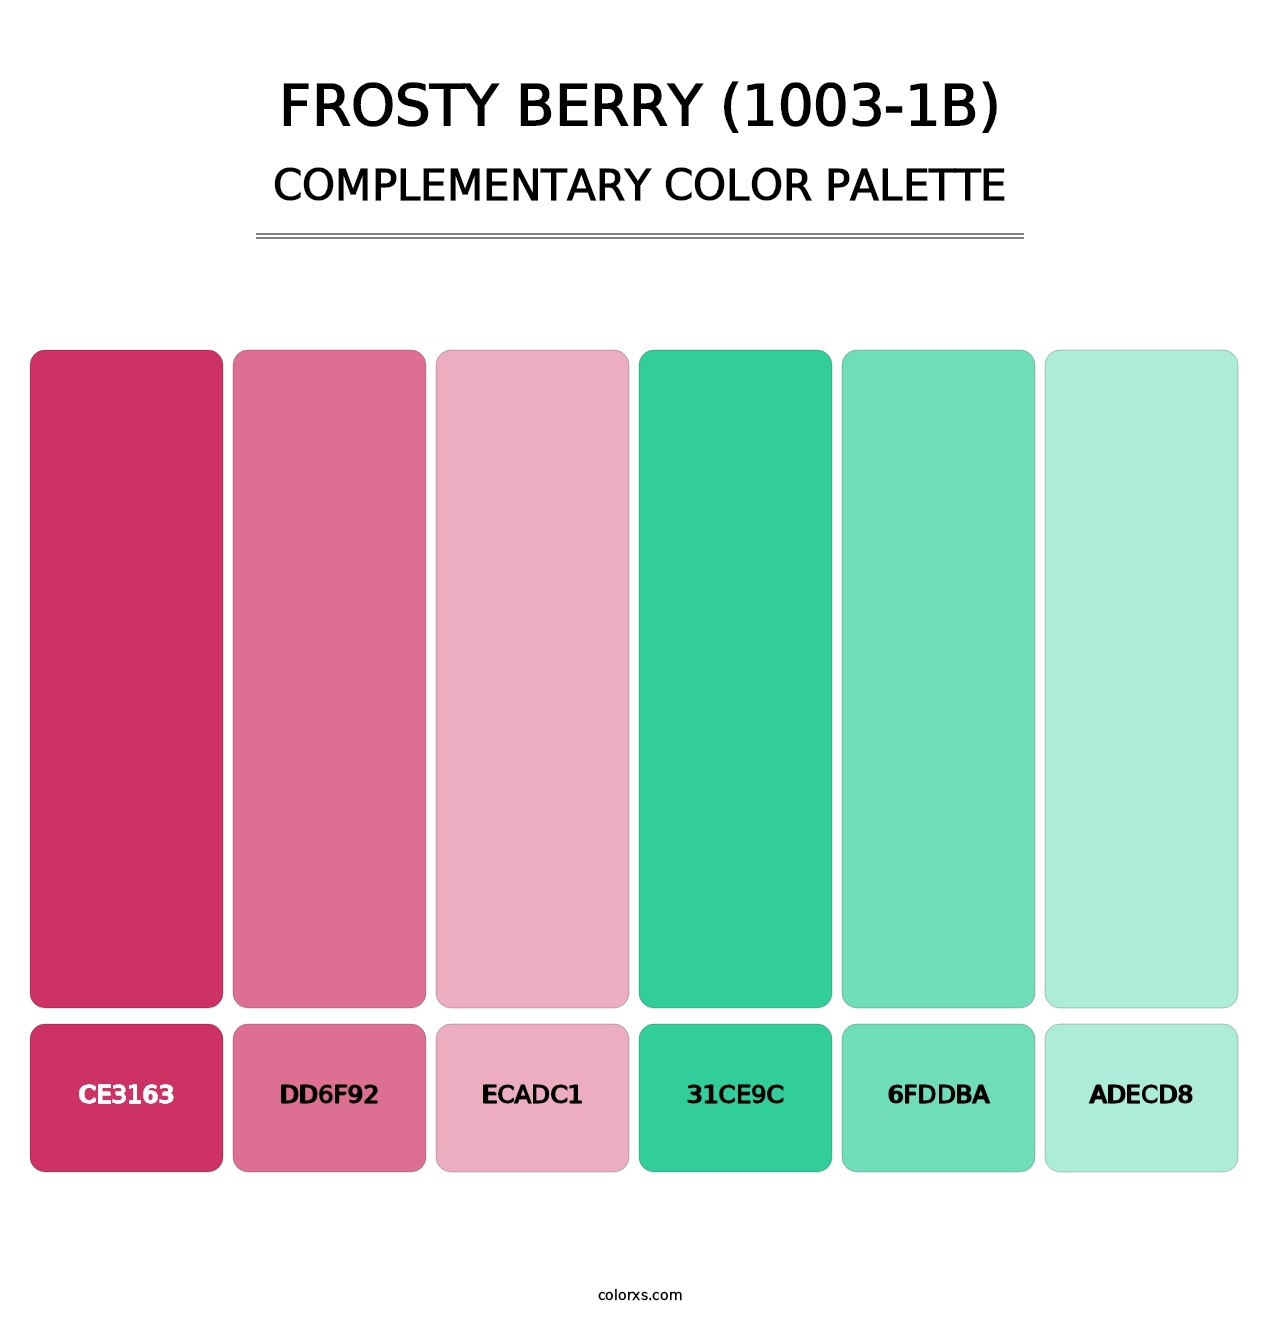 Frosty Berry (1003-1B) - Complementary Color Palette